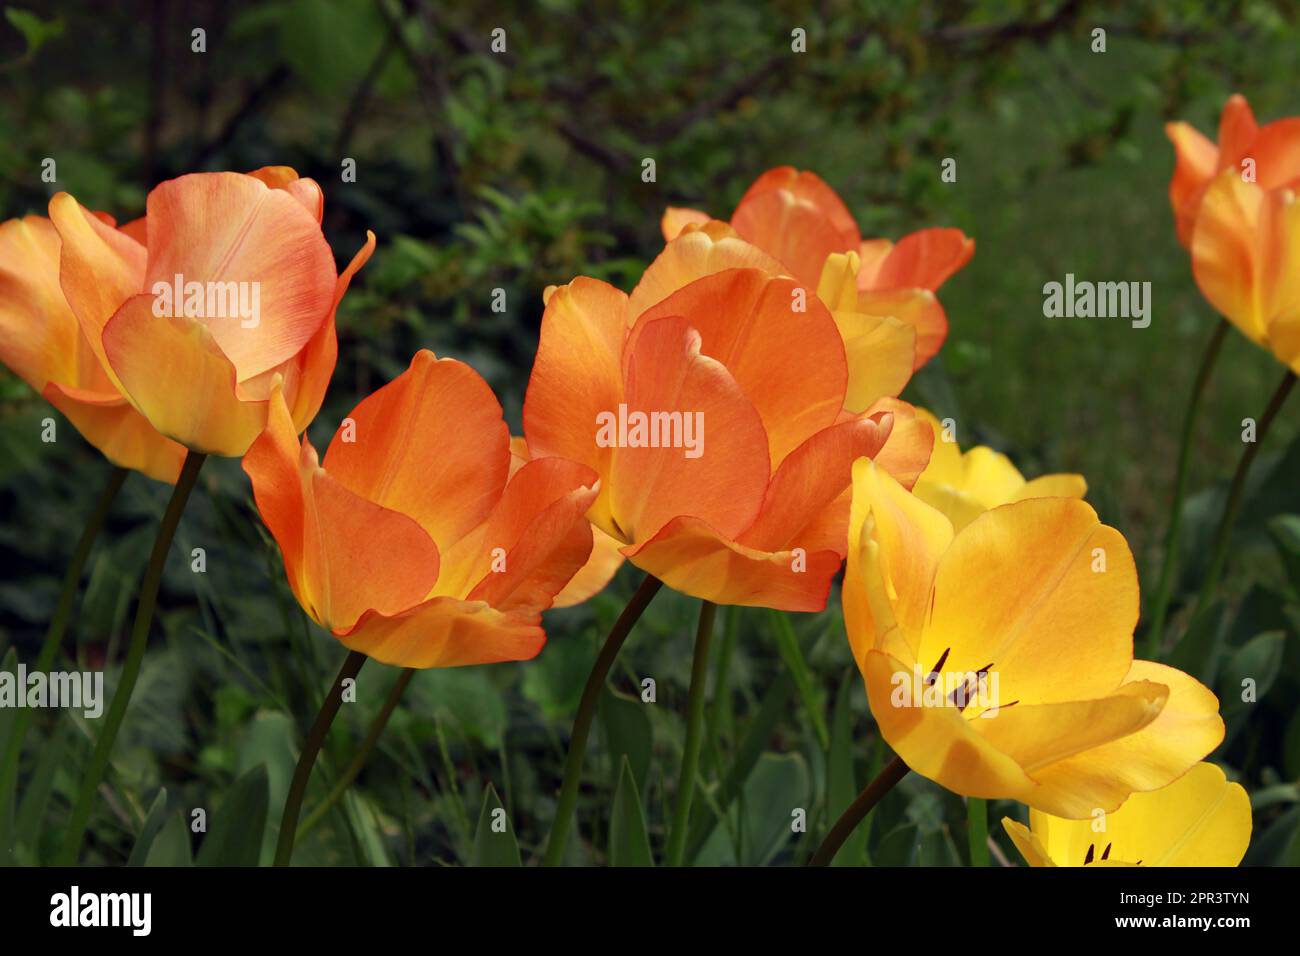 Amazing colorful open tulips during a beautiful sunny day Stock Photo